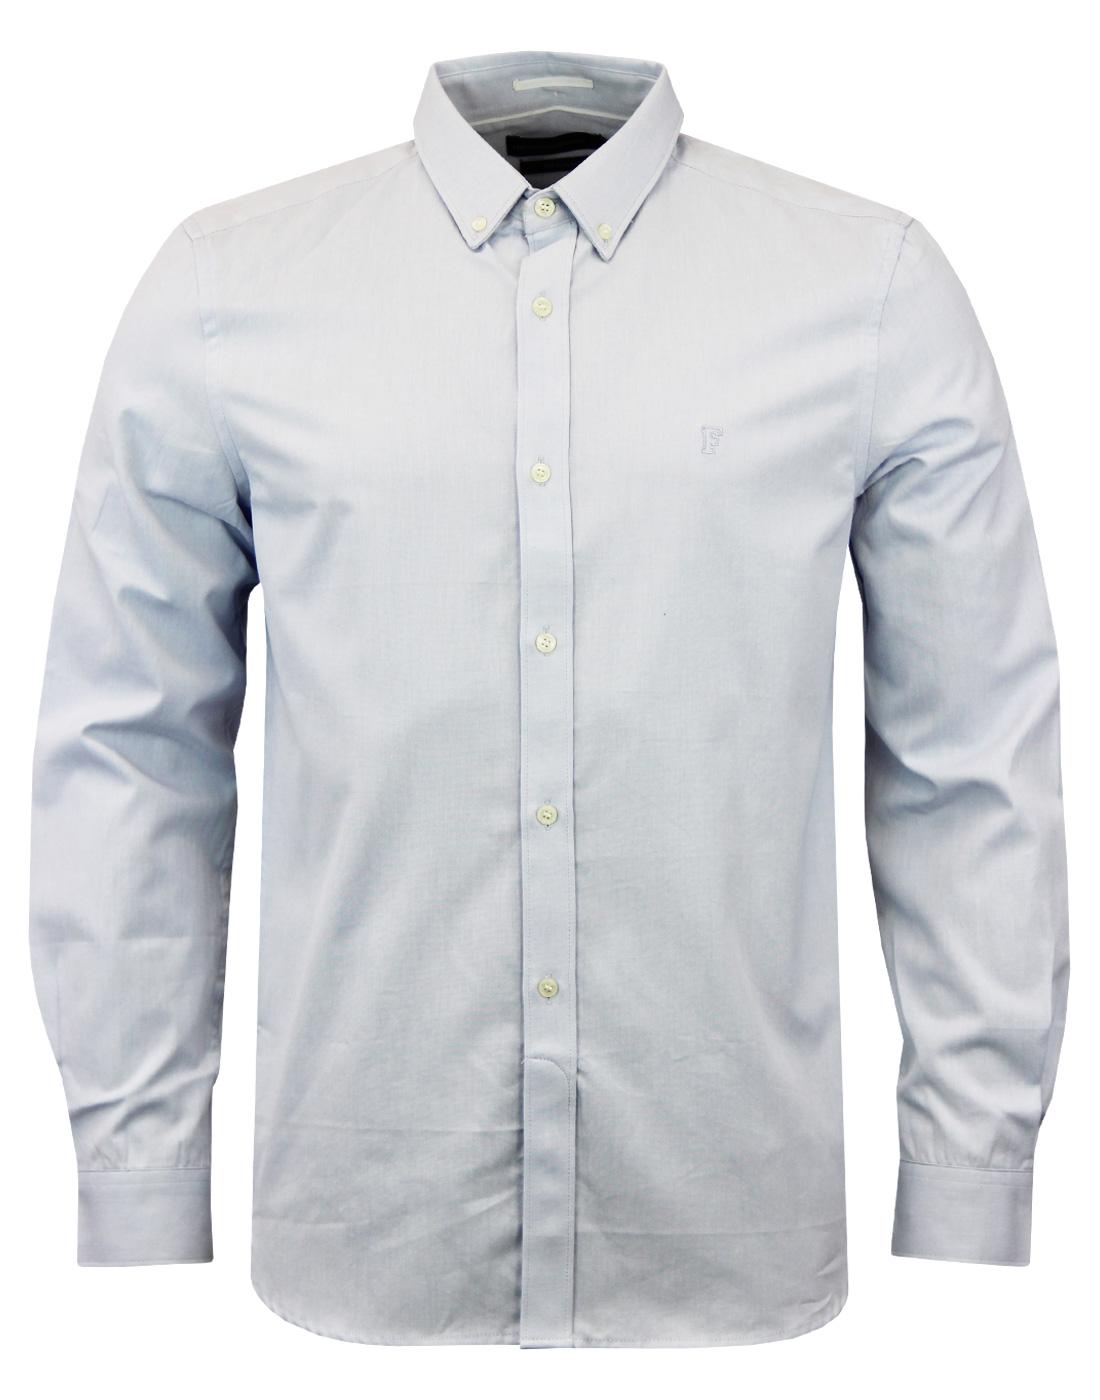 FRENCH CONNECTION Retro 60s Mod Classic Soft Oxford Shirt in Blue